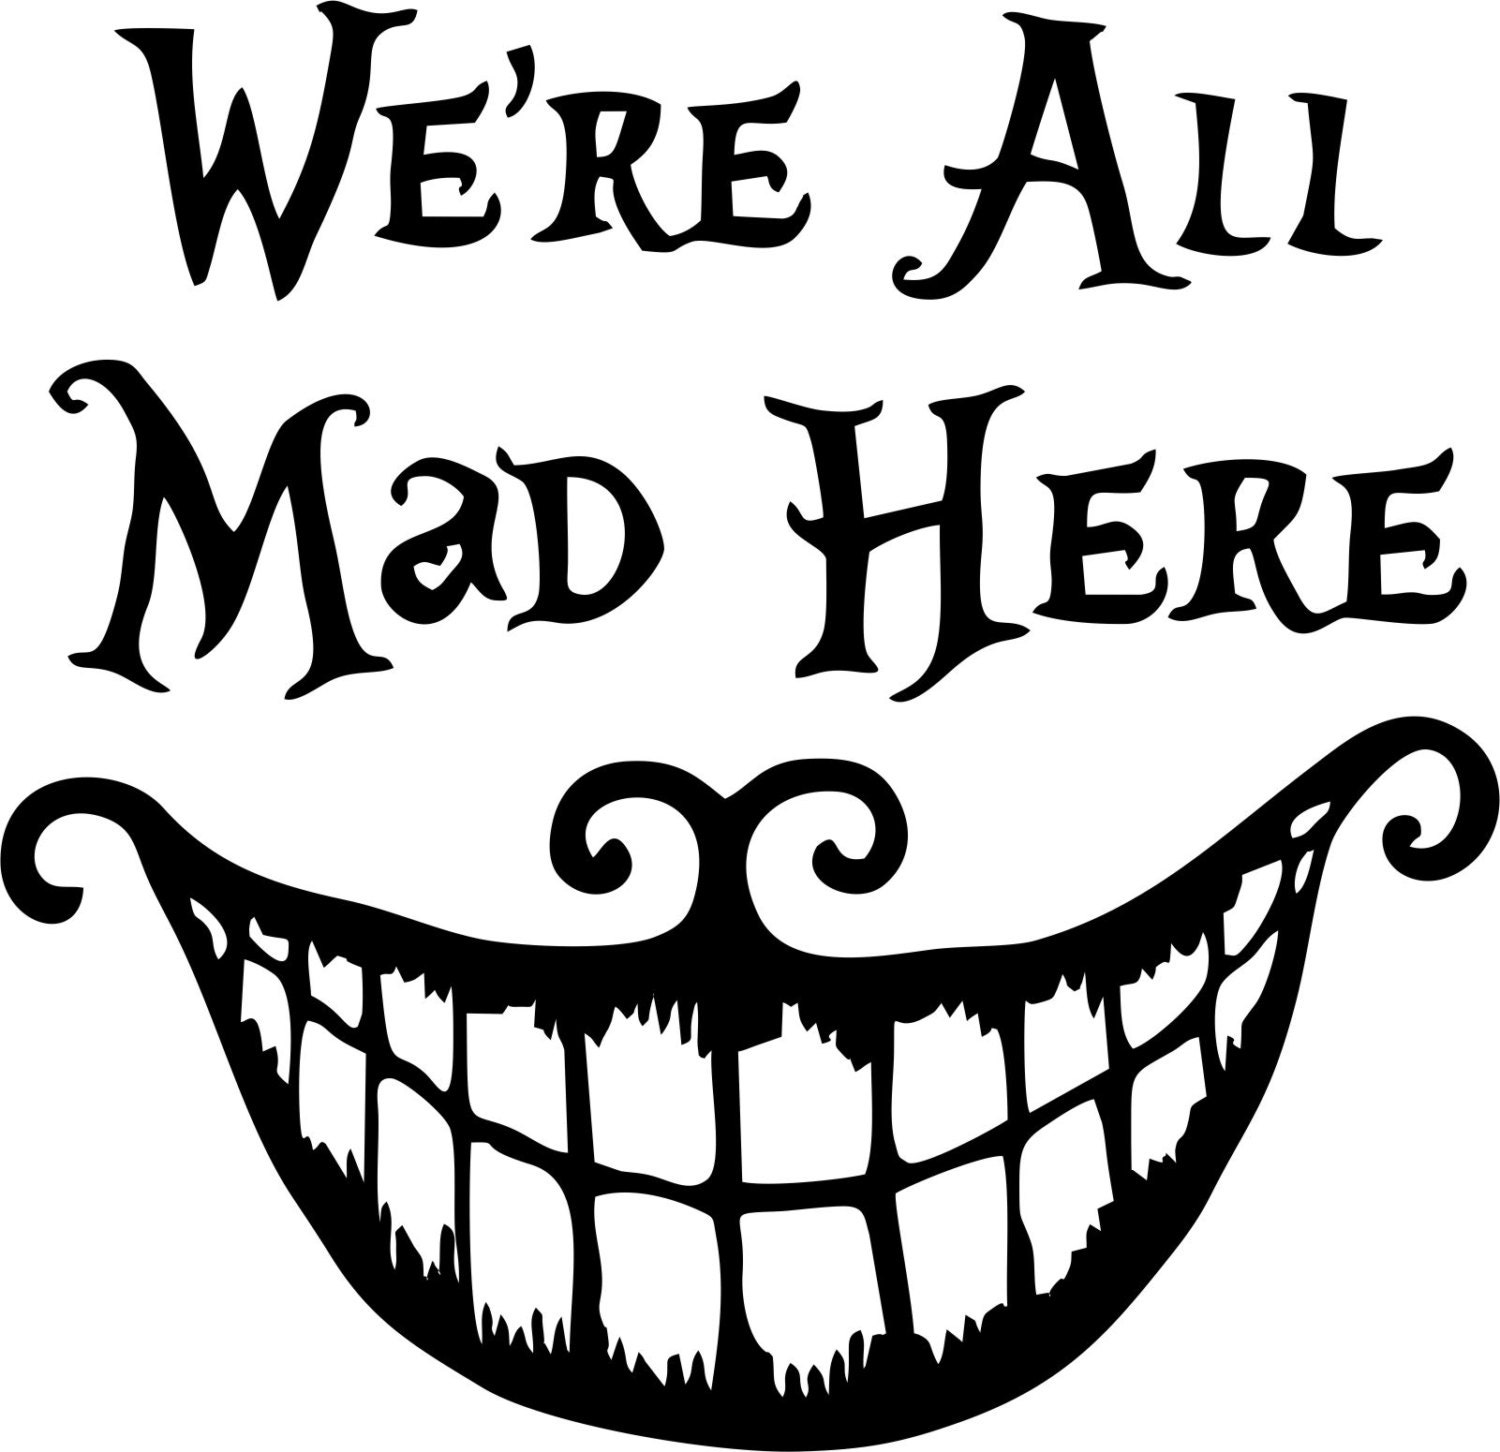 Alice in Wonderland quote we're all mad here vinyl wall